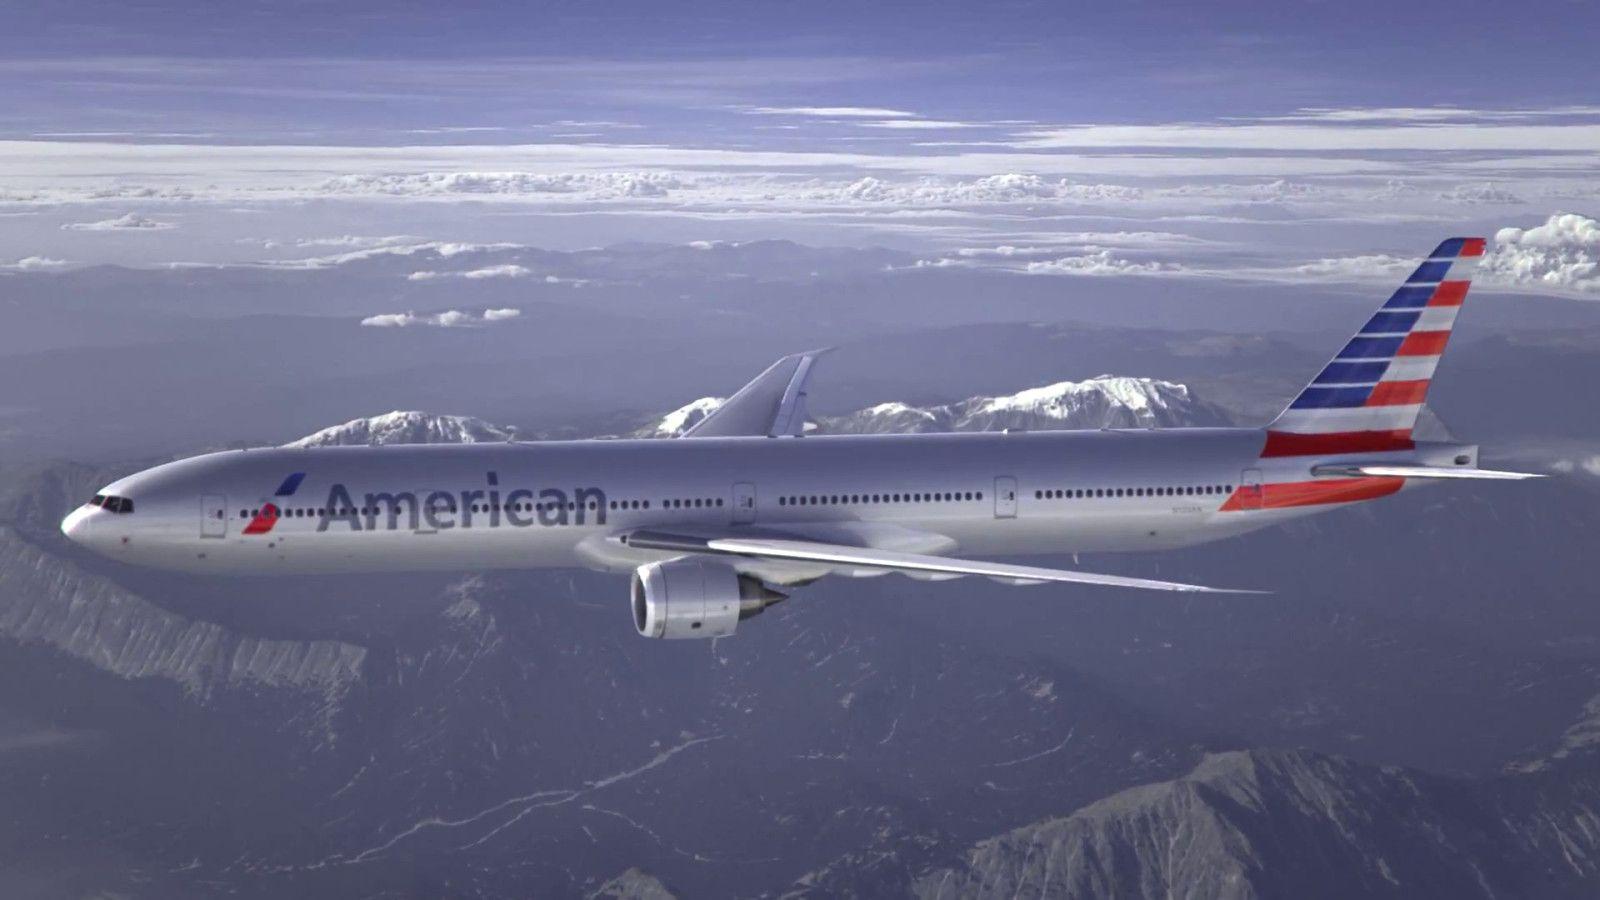 American Airlines Wallpapers